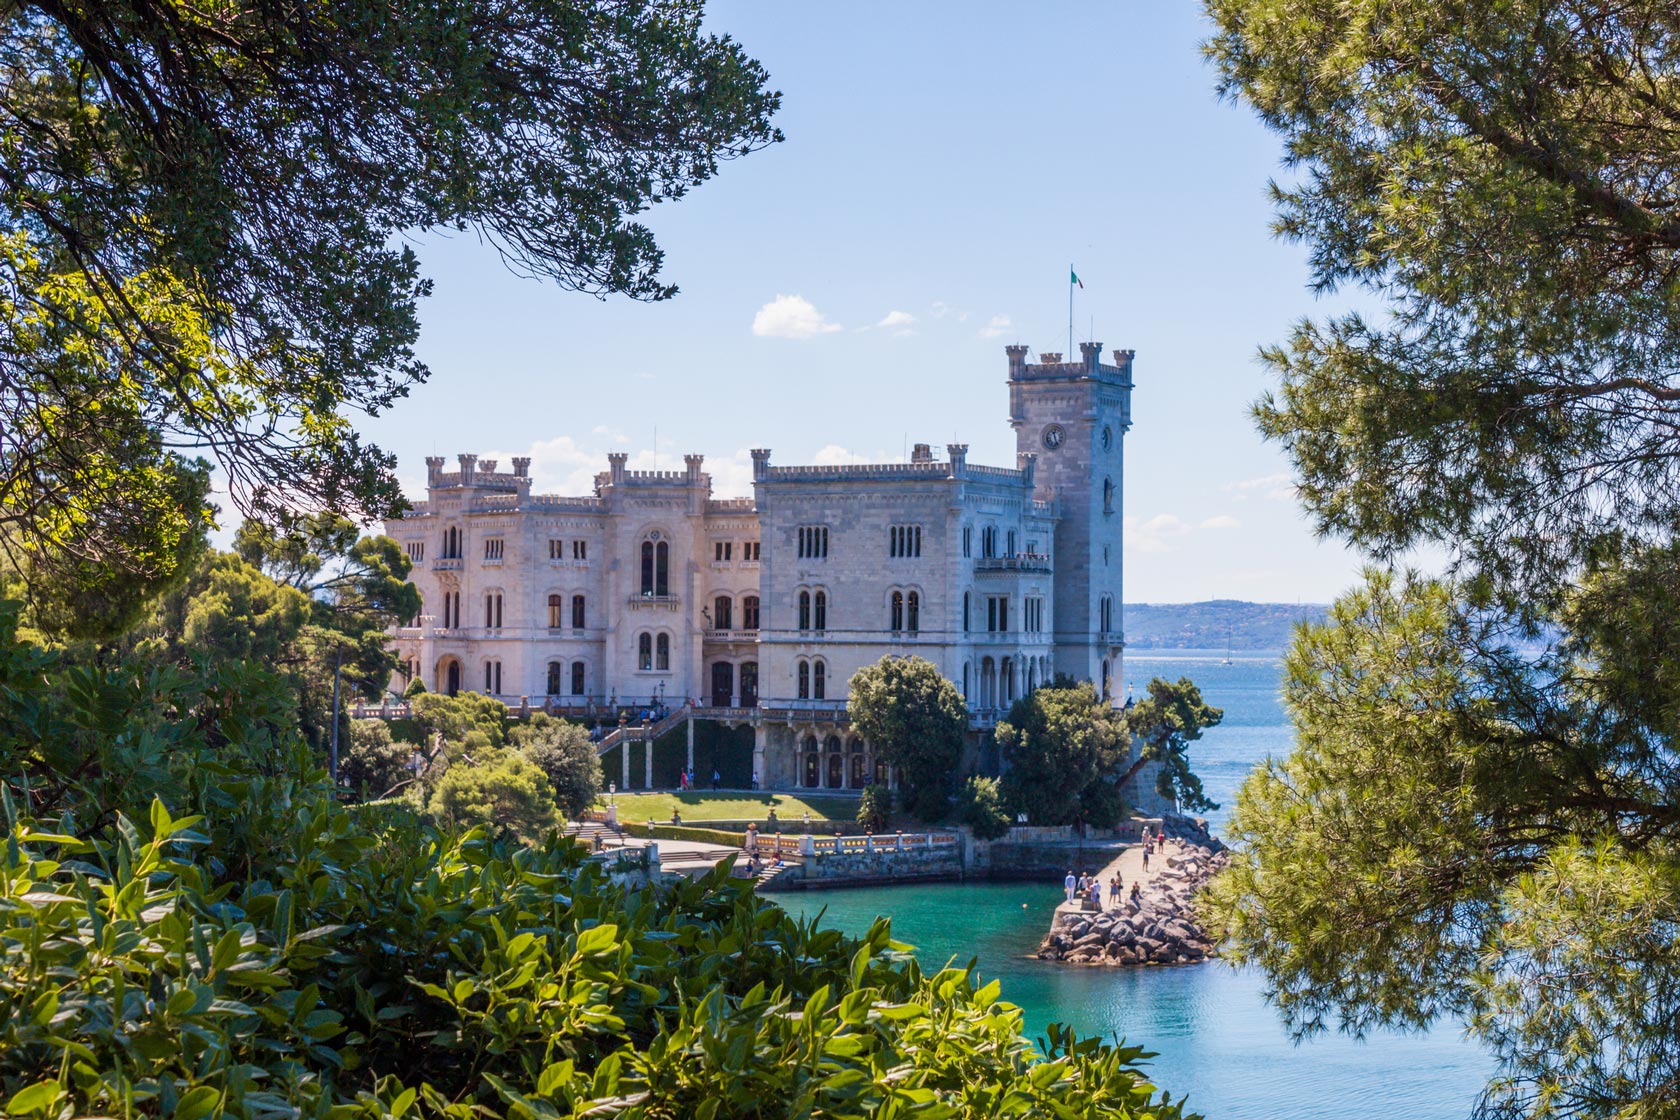 View of Miramare Castle, a 19th Century Castle, on the Gulf of Trieste.